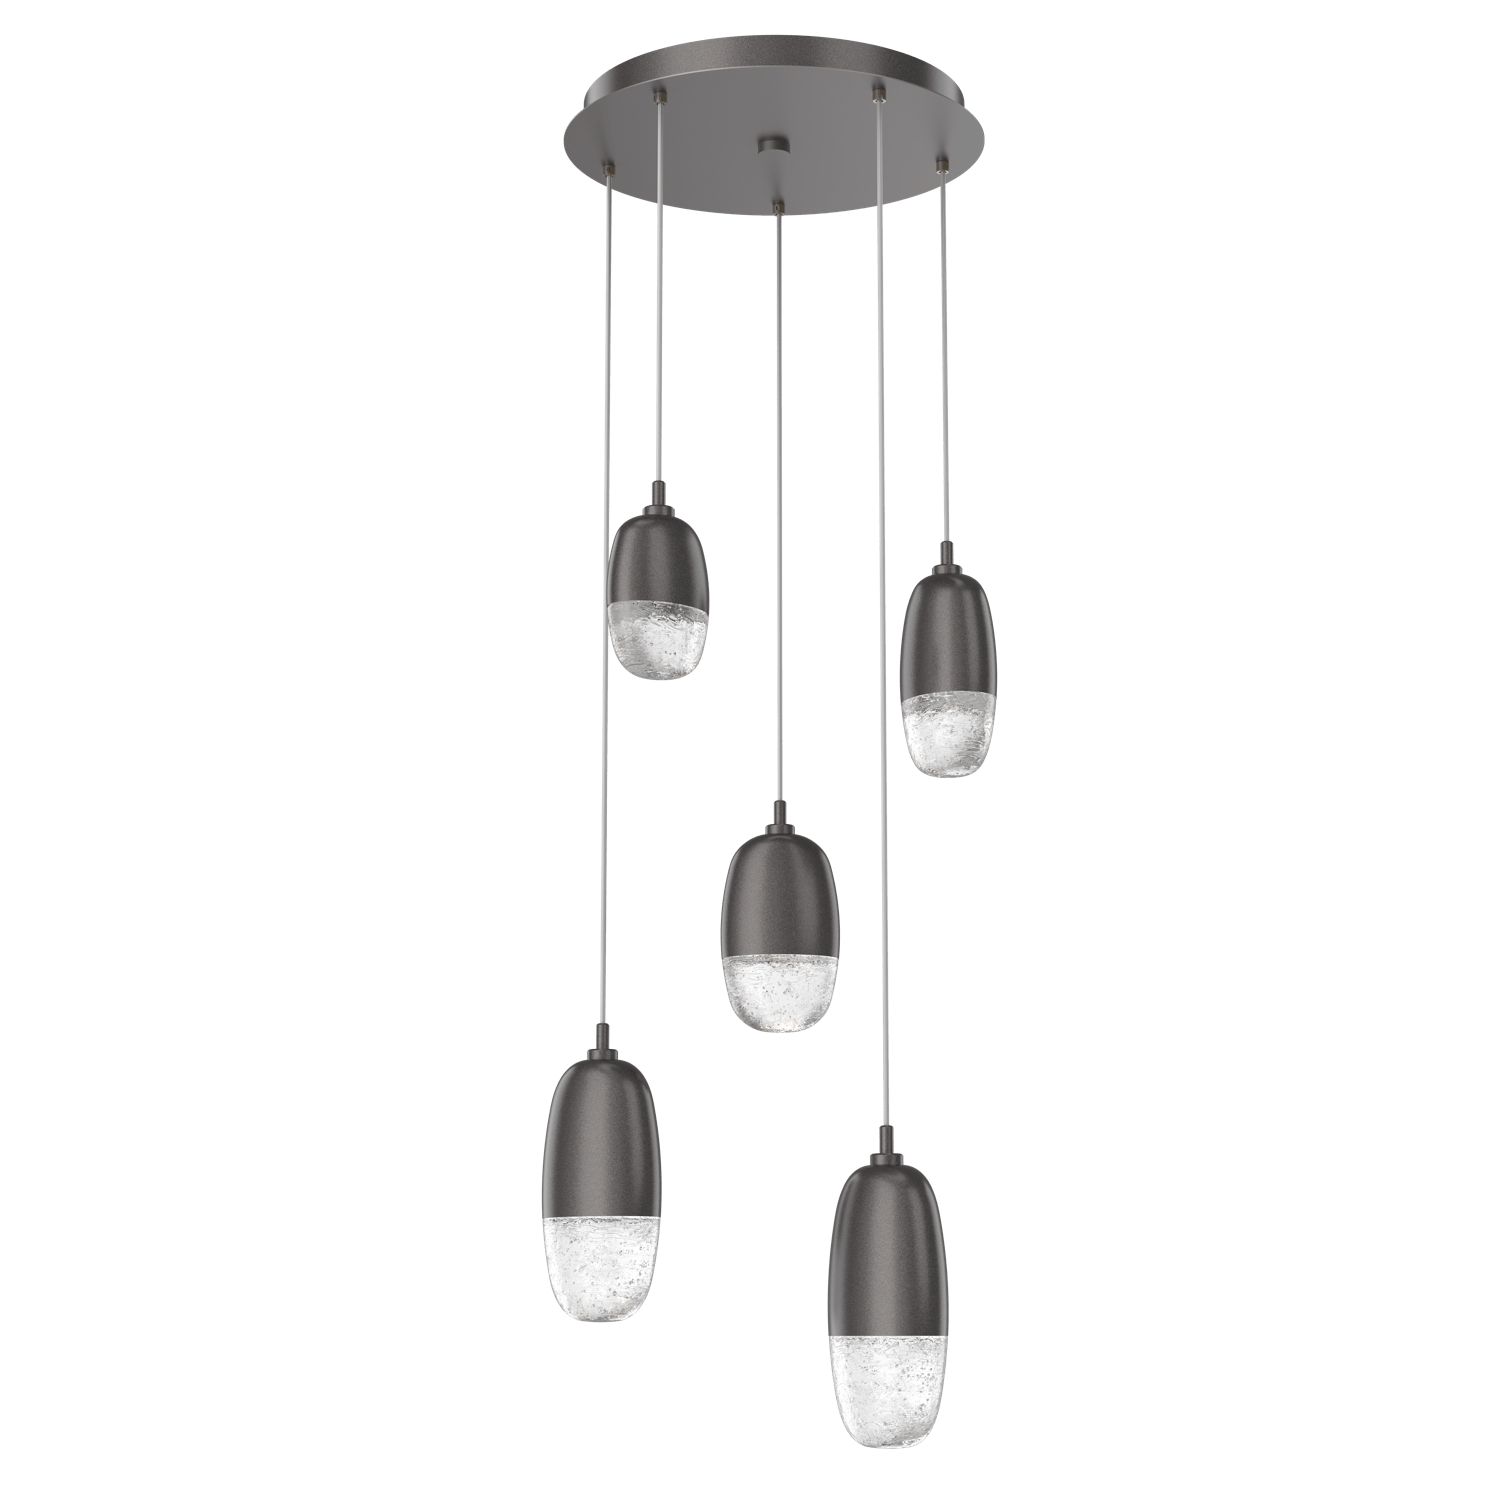 CHB0079-05-GP-Hammerton-Studio-Pebble-5-light-round-pendant-chandelier-with-graphite-finish-and-clear-cast-glass-shades-and-LED-lamping